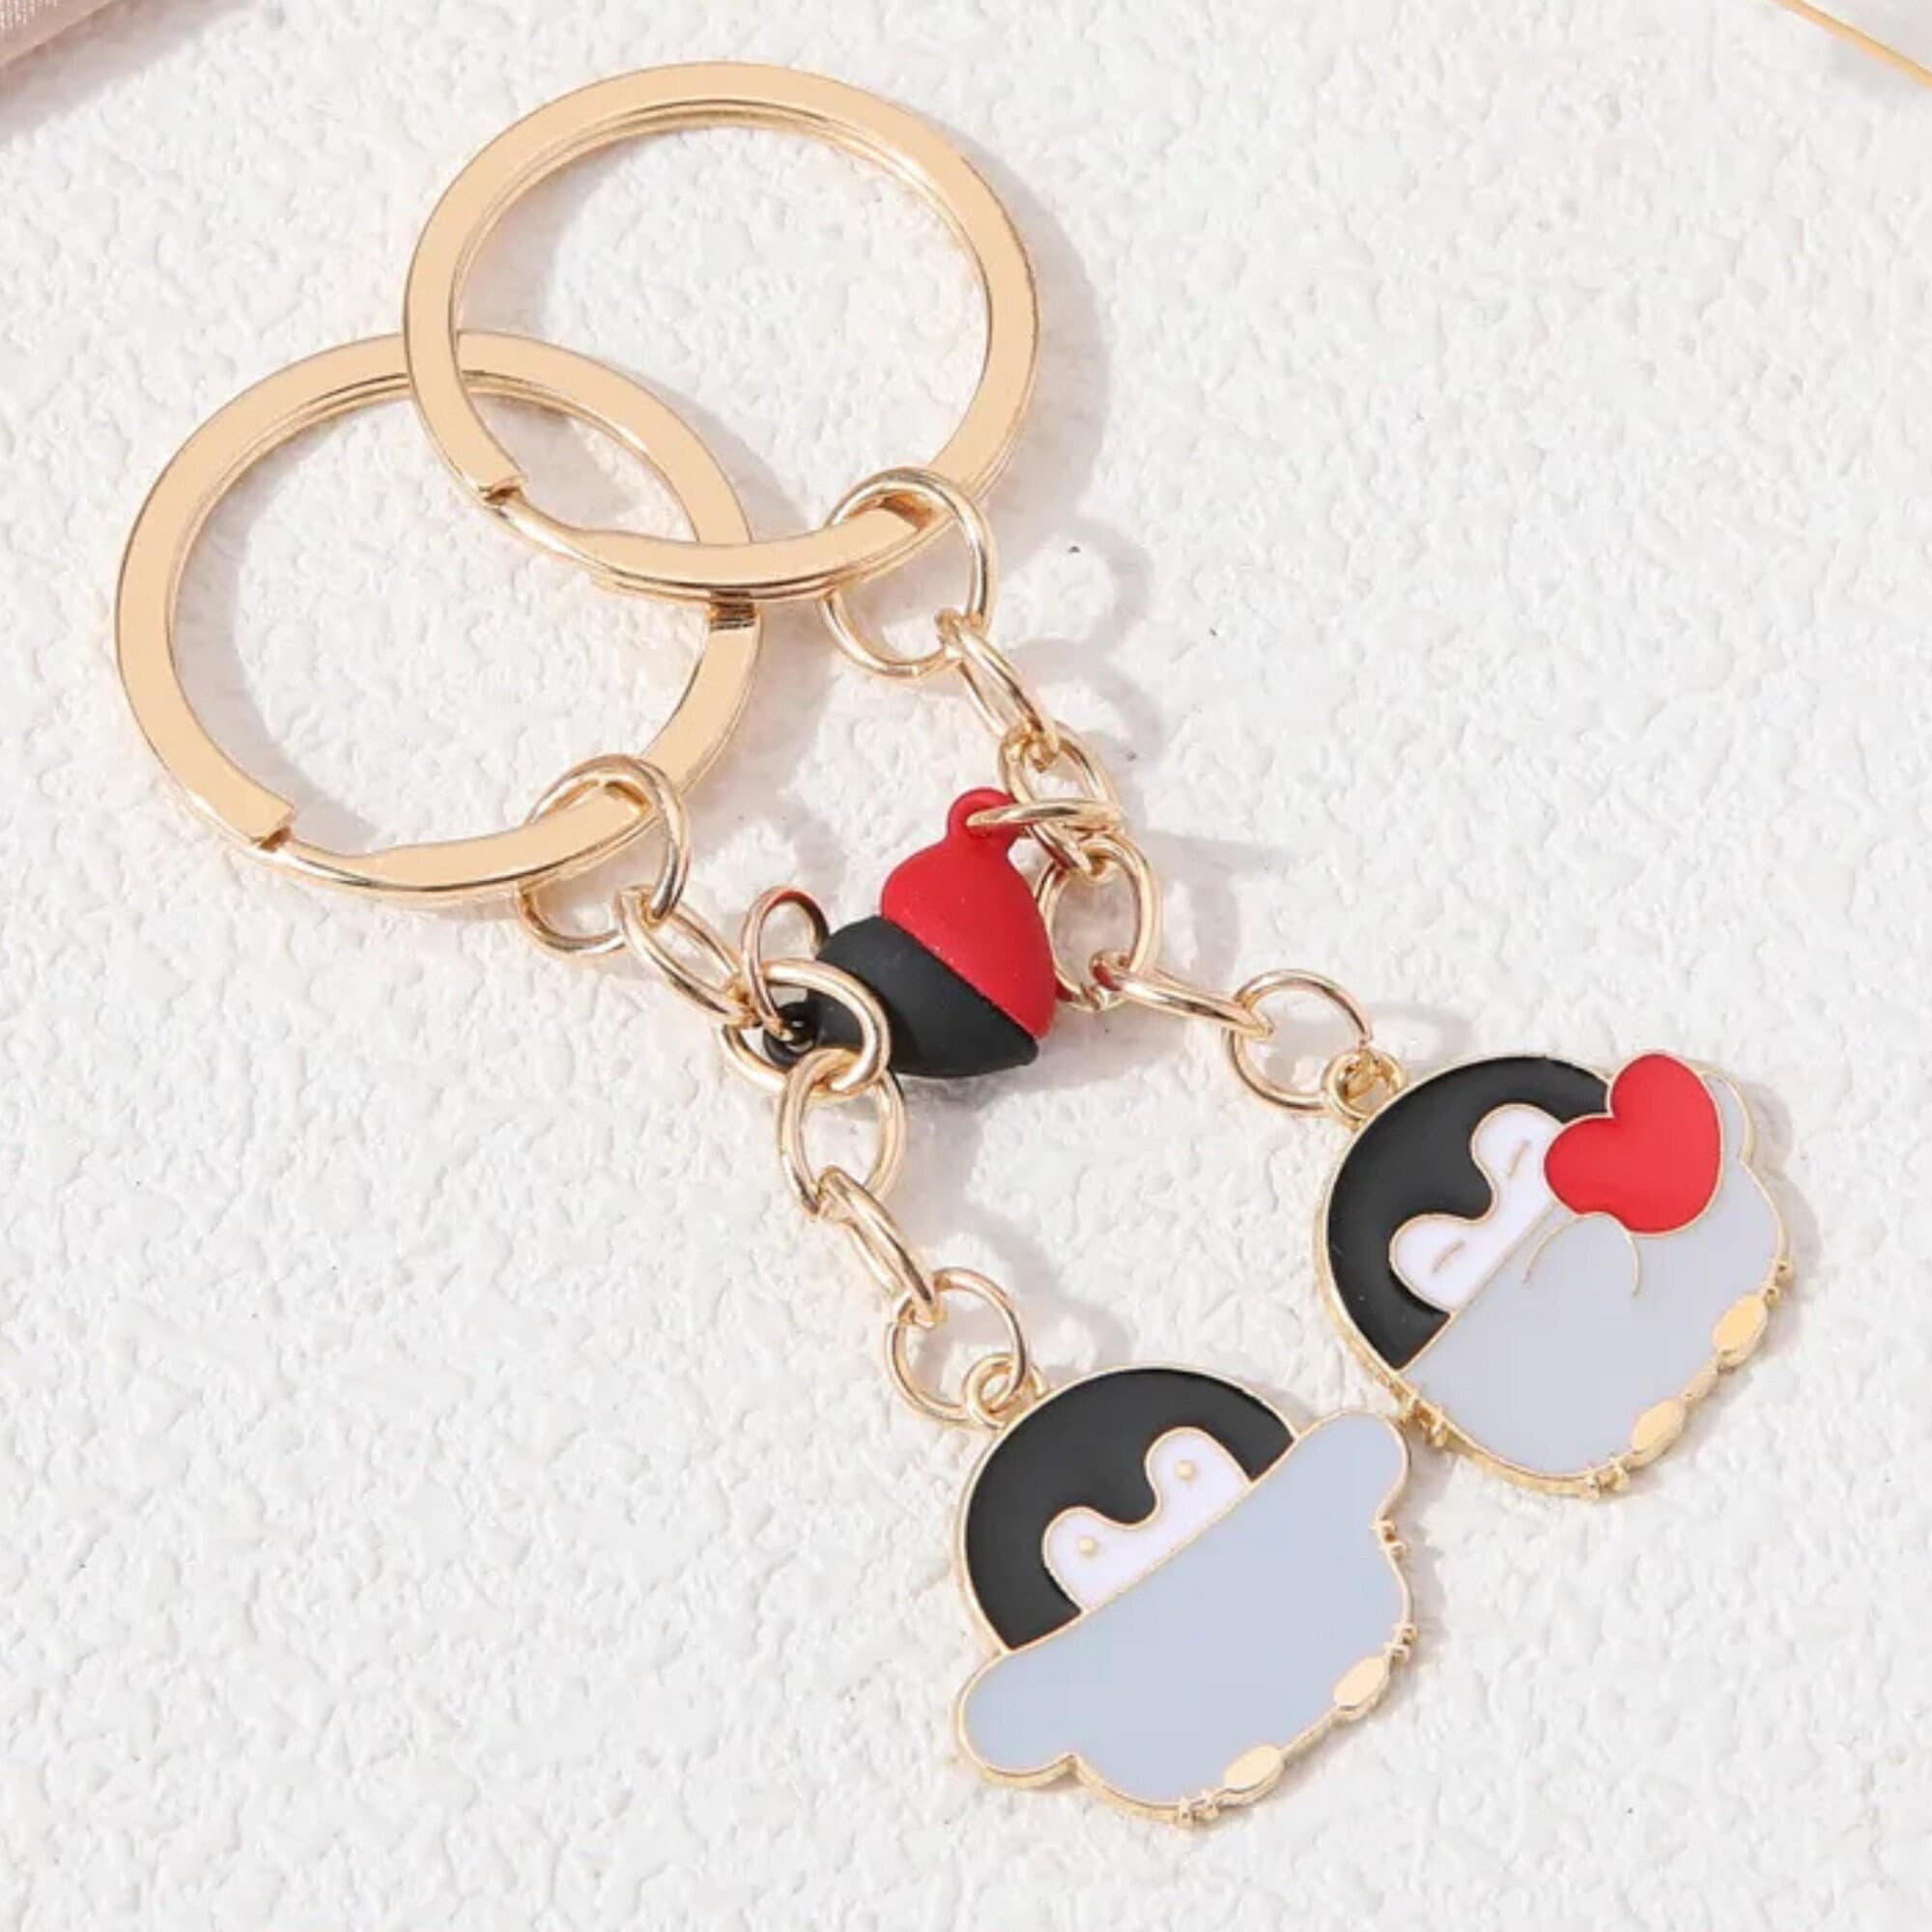 Magnetic Keychain for Couples | My Couple Goal Pink